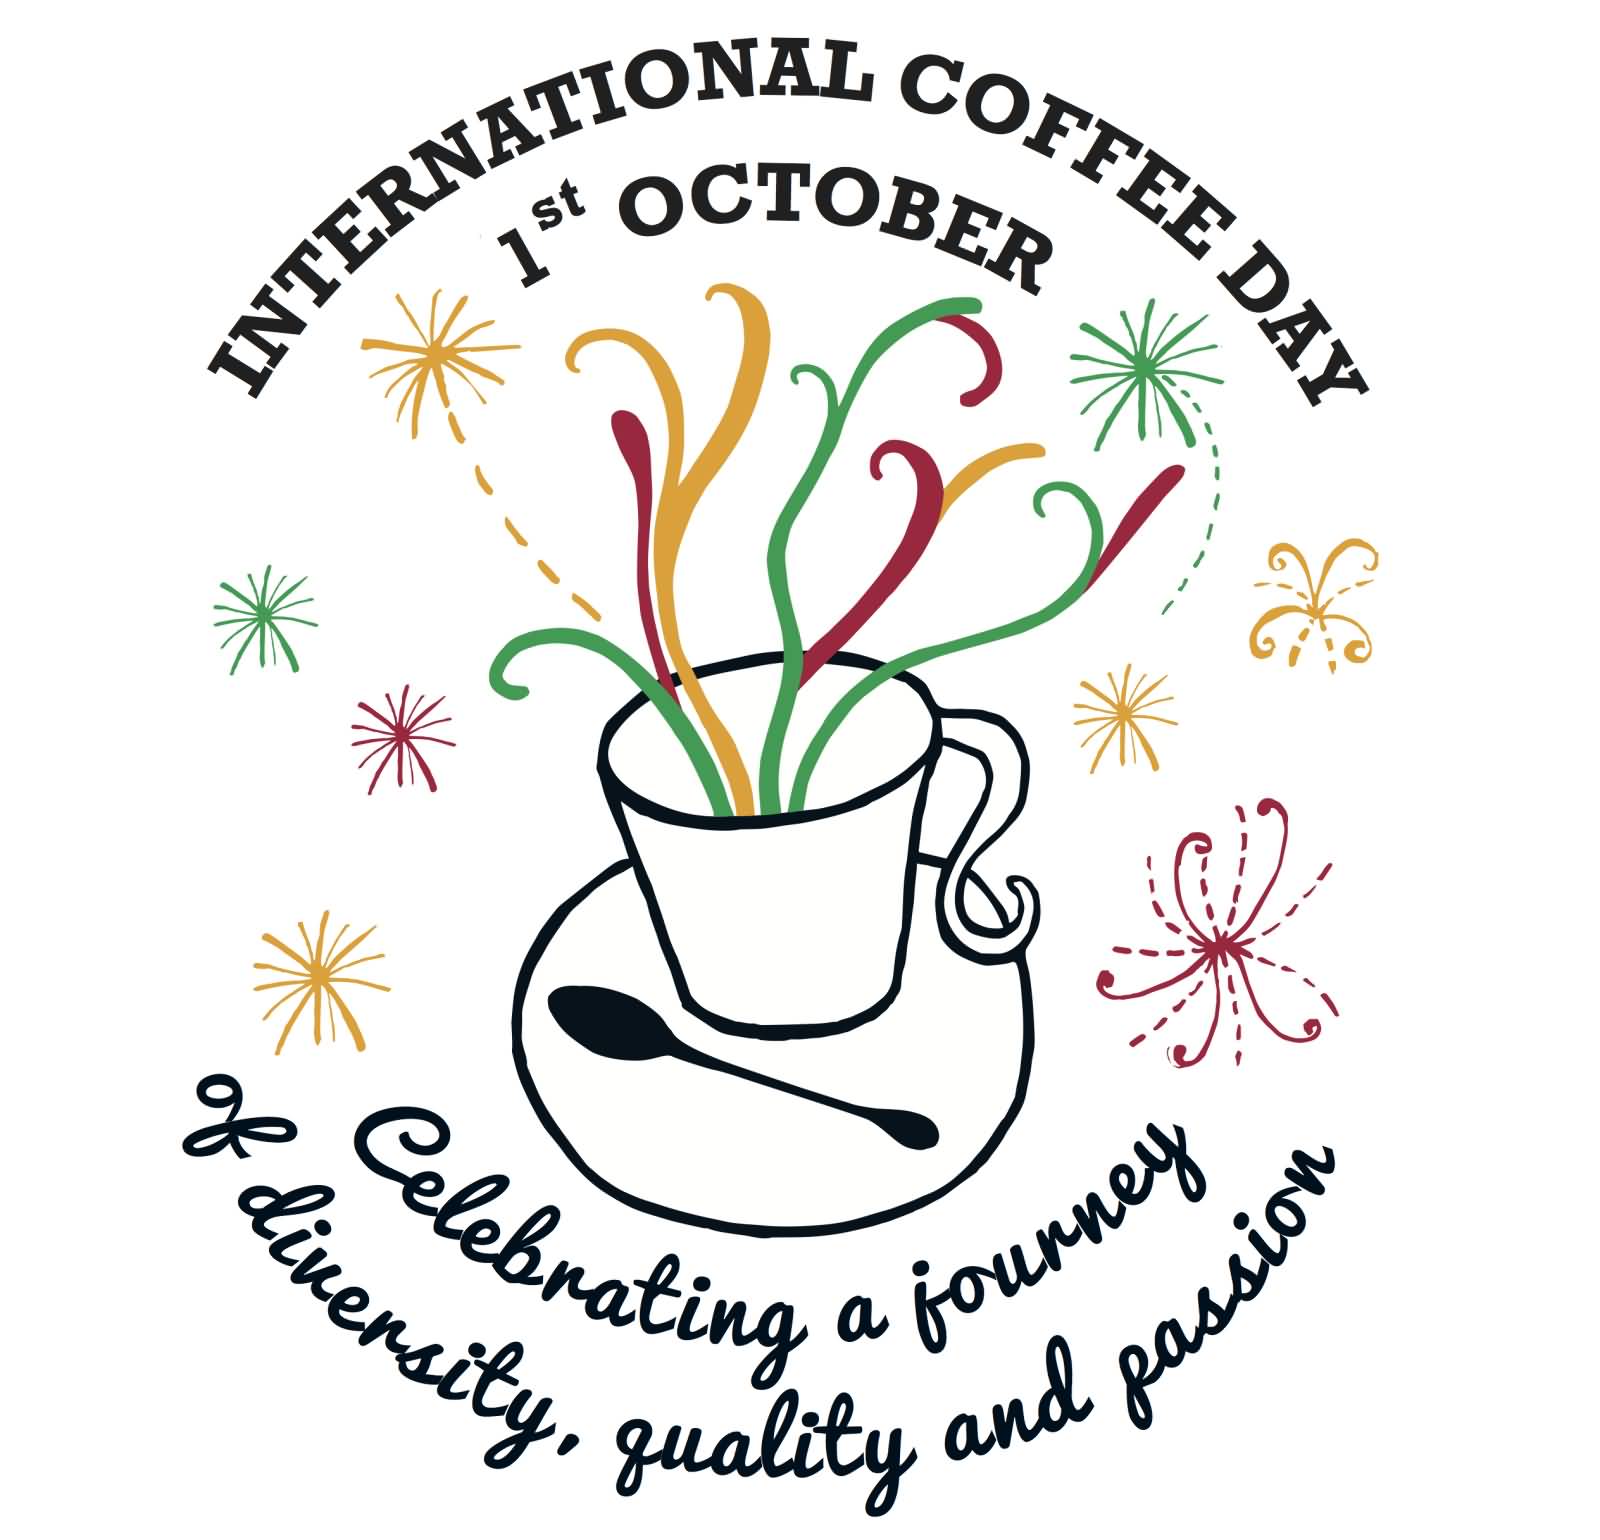 International Coffee Day 1st October Celebrating A Journey Of Diversity, Quality And Passion